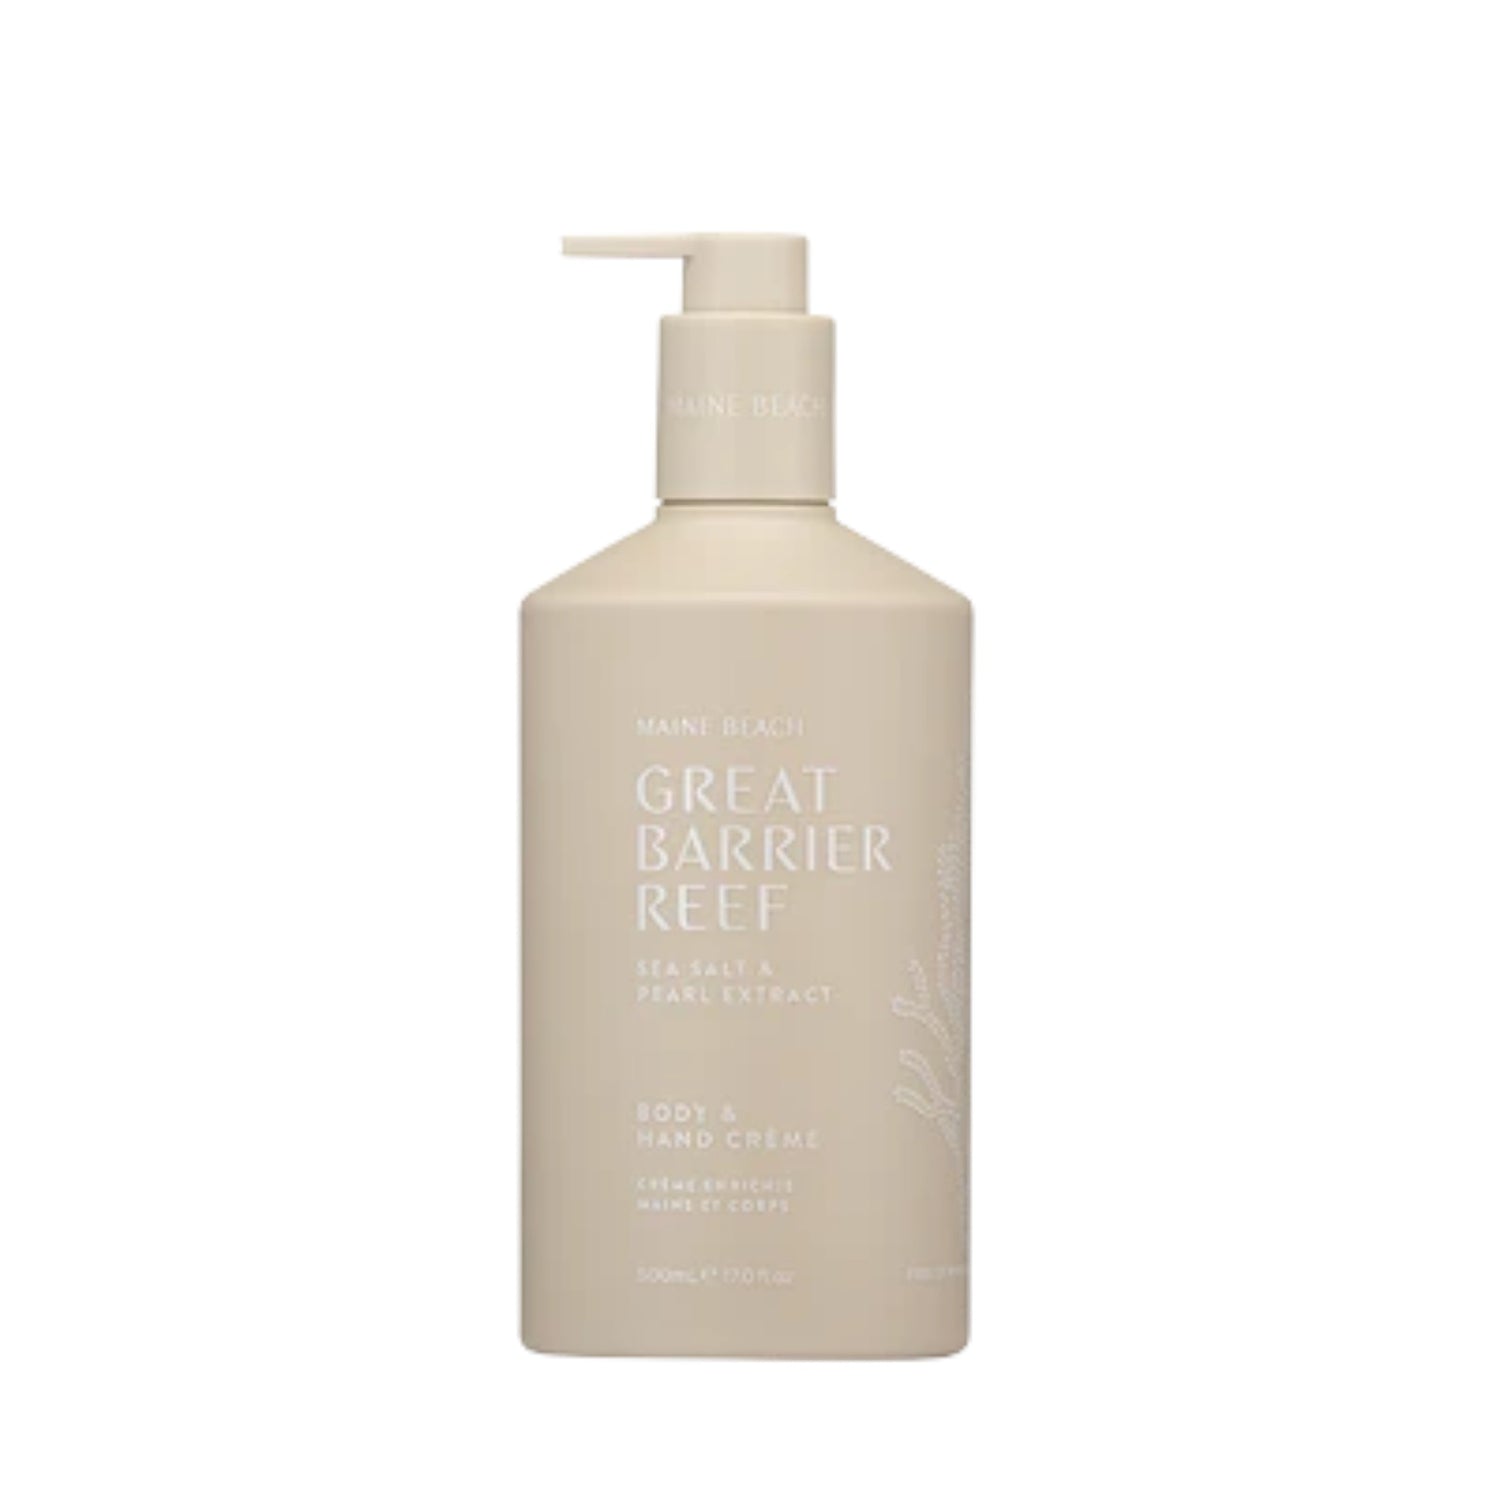 Great Barrier Reef Body & Hand Creme 500ml